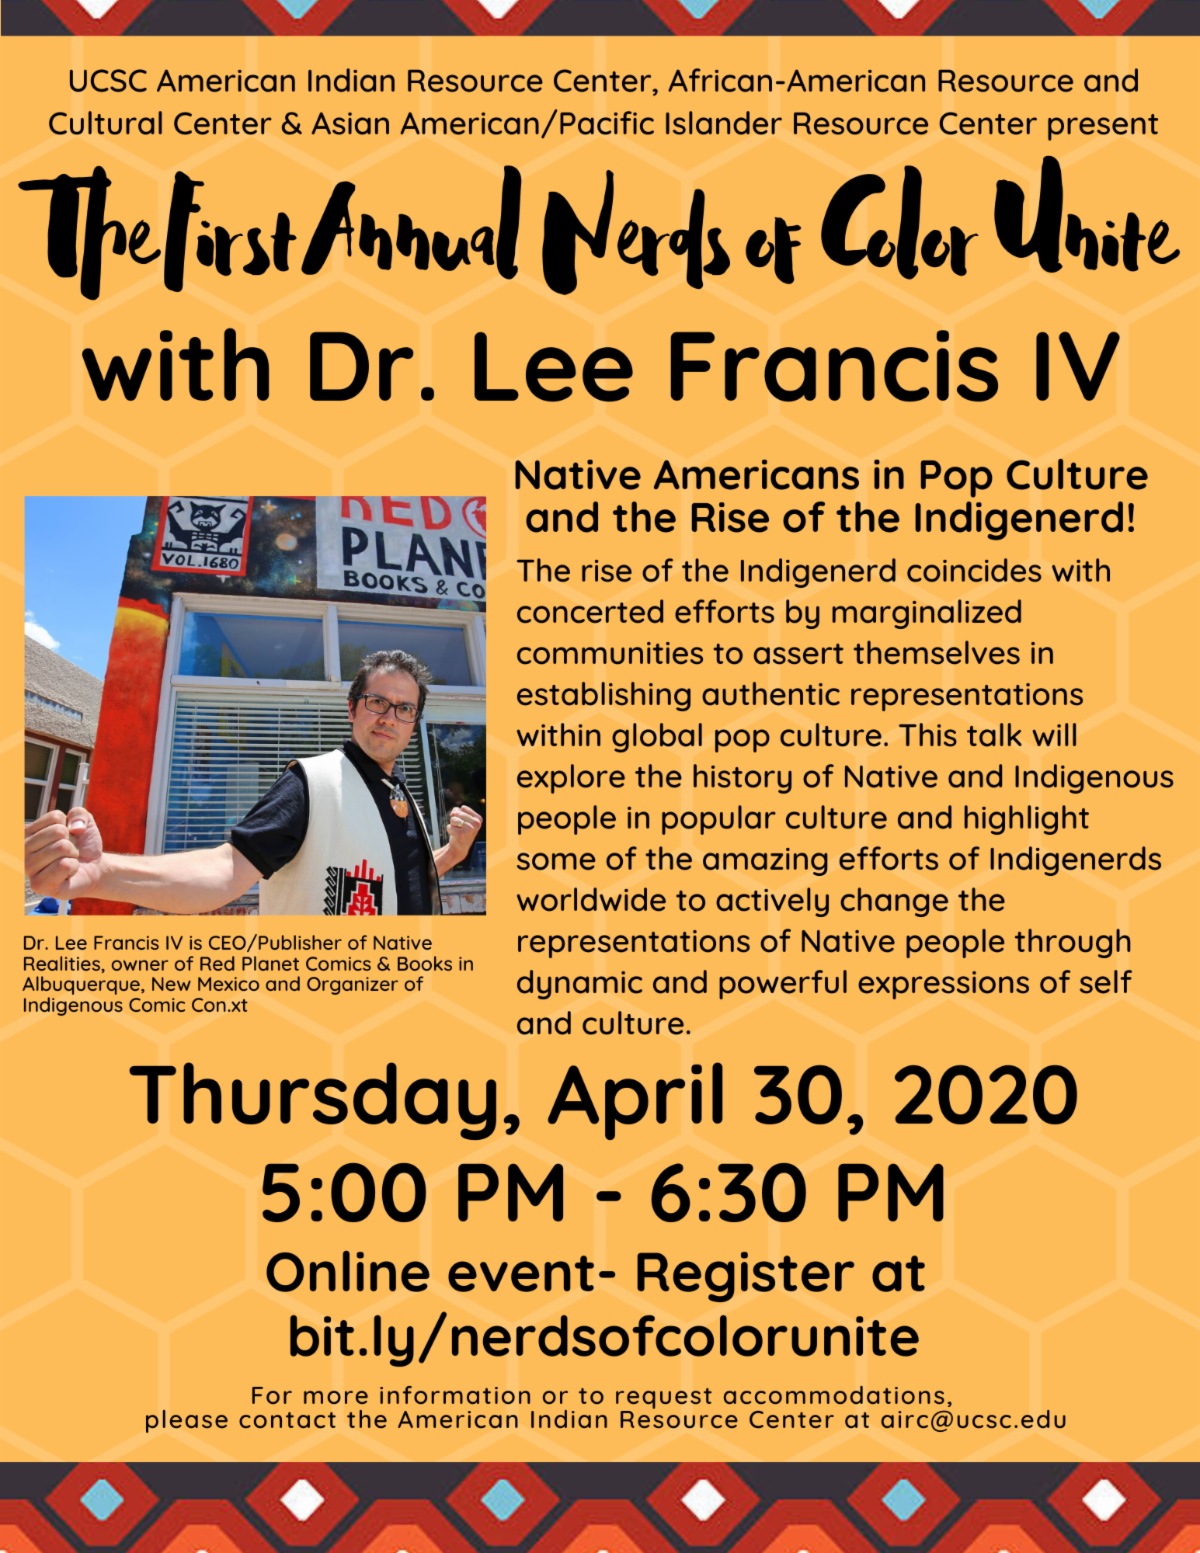 Watch the recording of this event by going to the AIRC's YouTube channel!! Nerds of Color Unite with Dr. Lee Francis IV: Native Americans in Pop Culture and the Rise of Indigenerd!